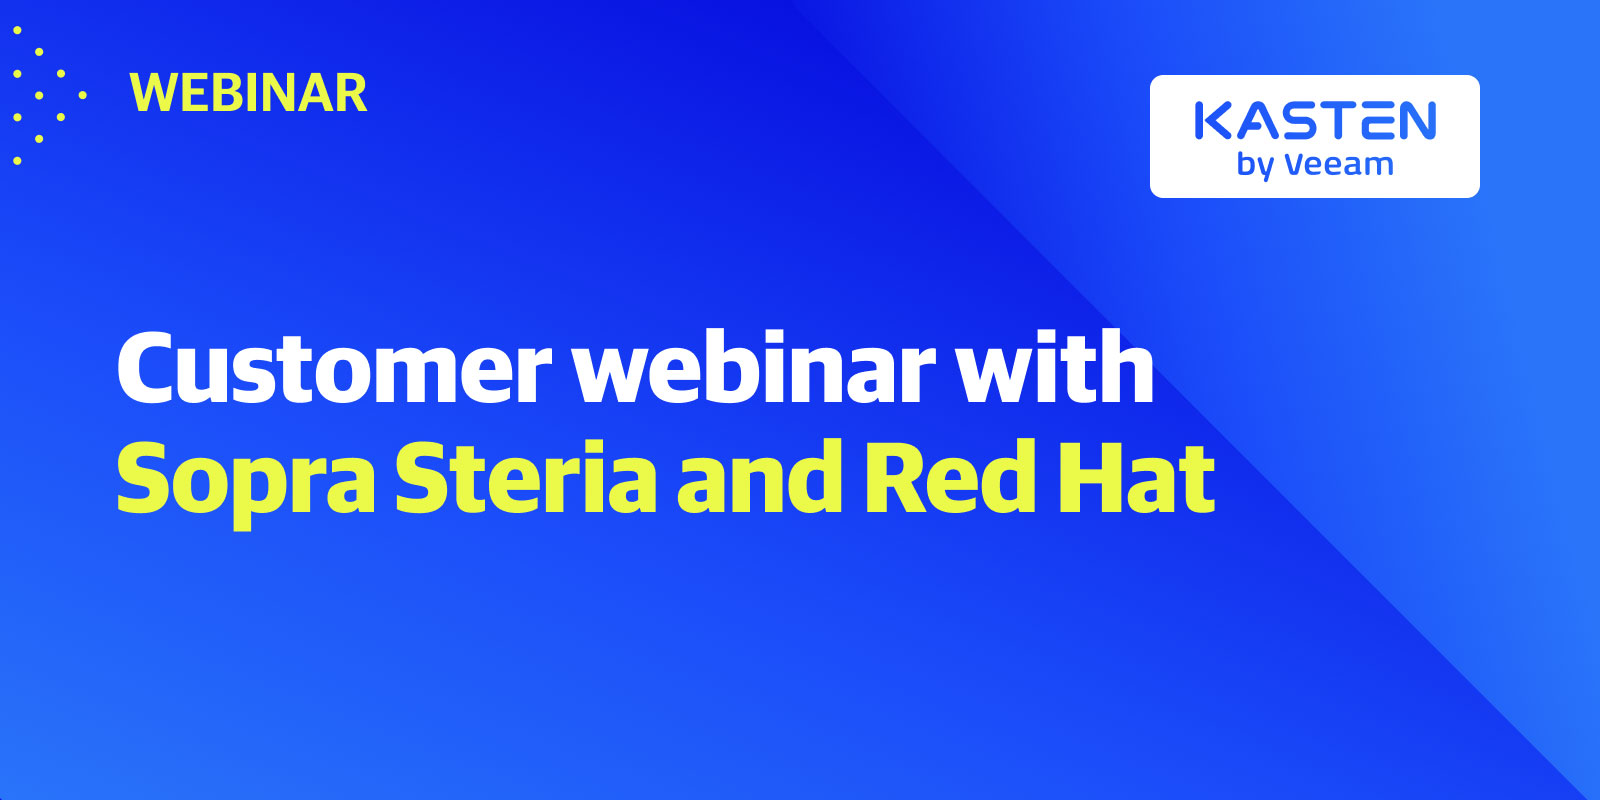 Customer-webinar-with-Sopra-Steria-and-Red-Hat